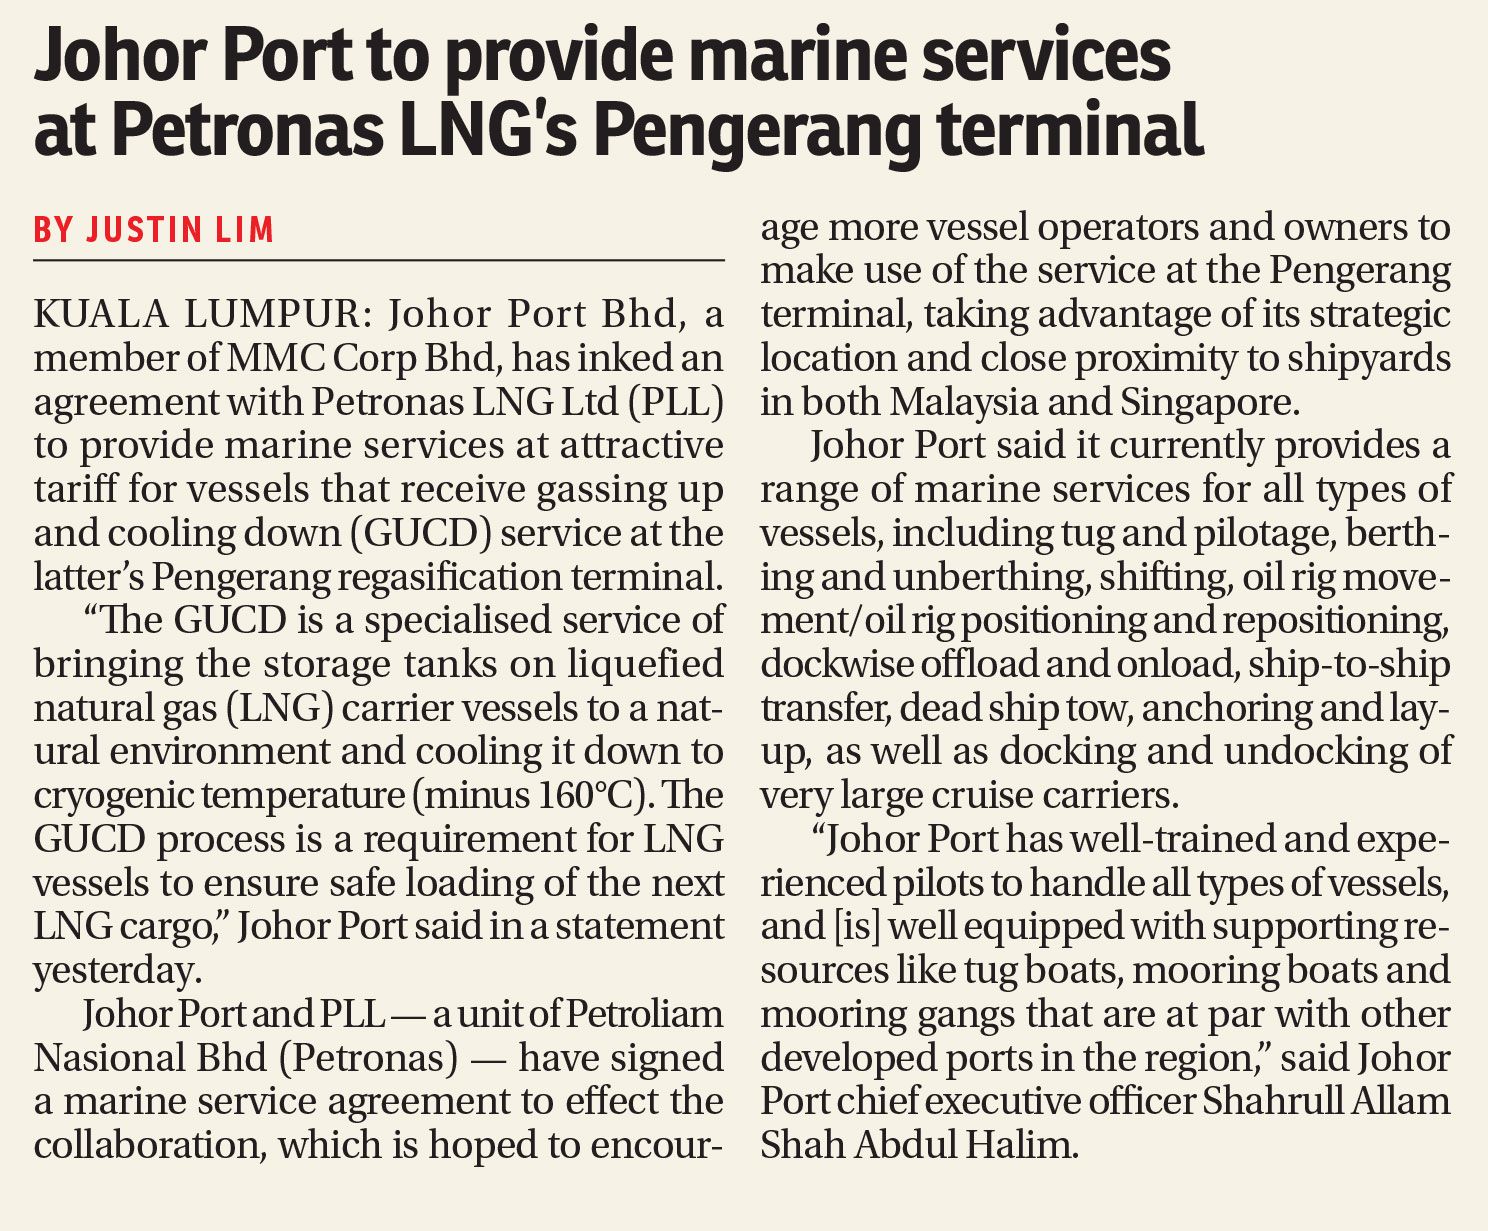 Johor Port, Petronas LNG To Provide marine services for vessels